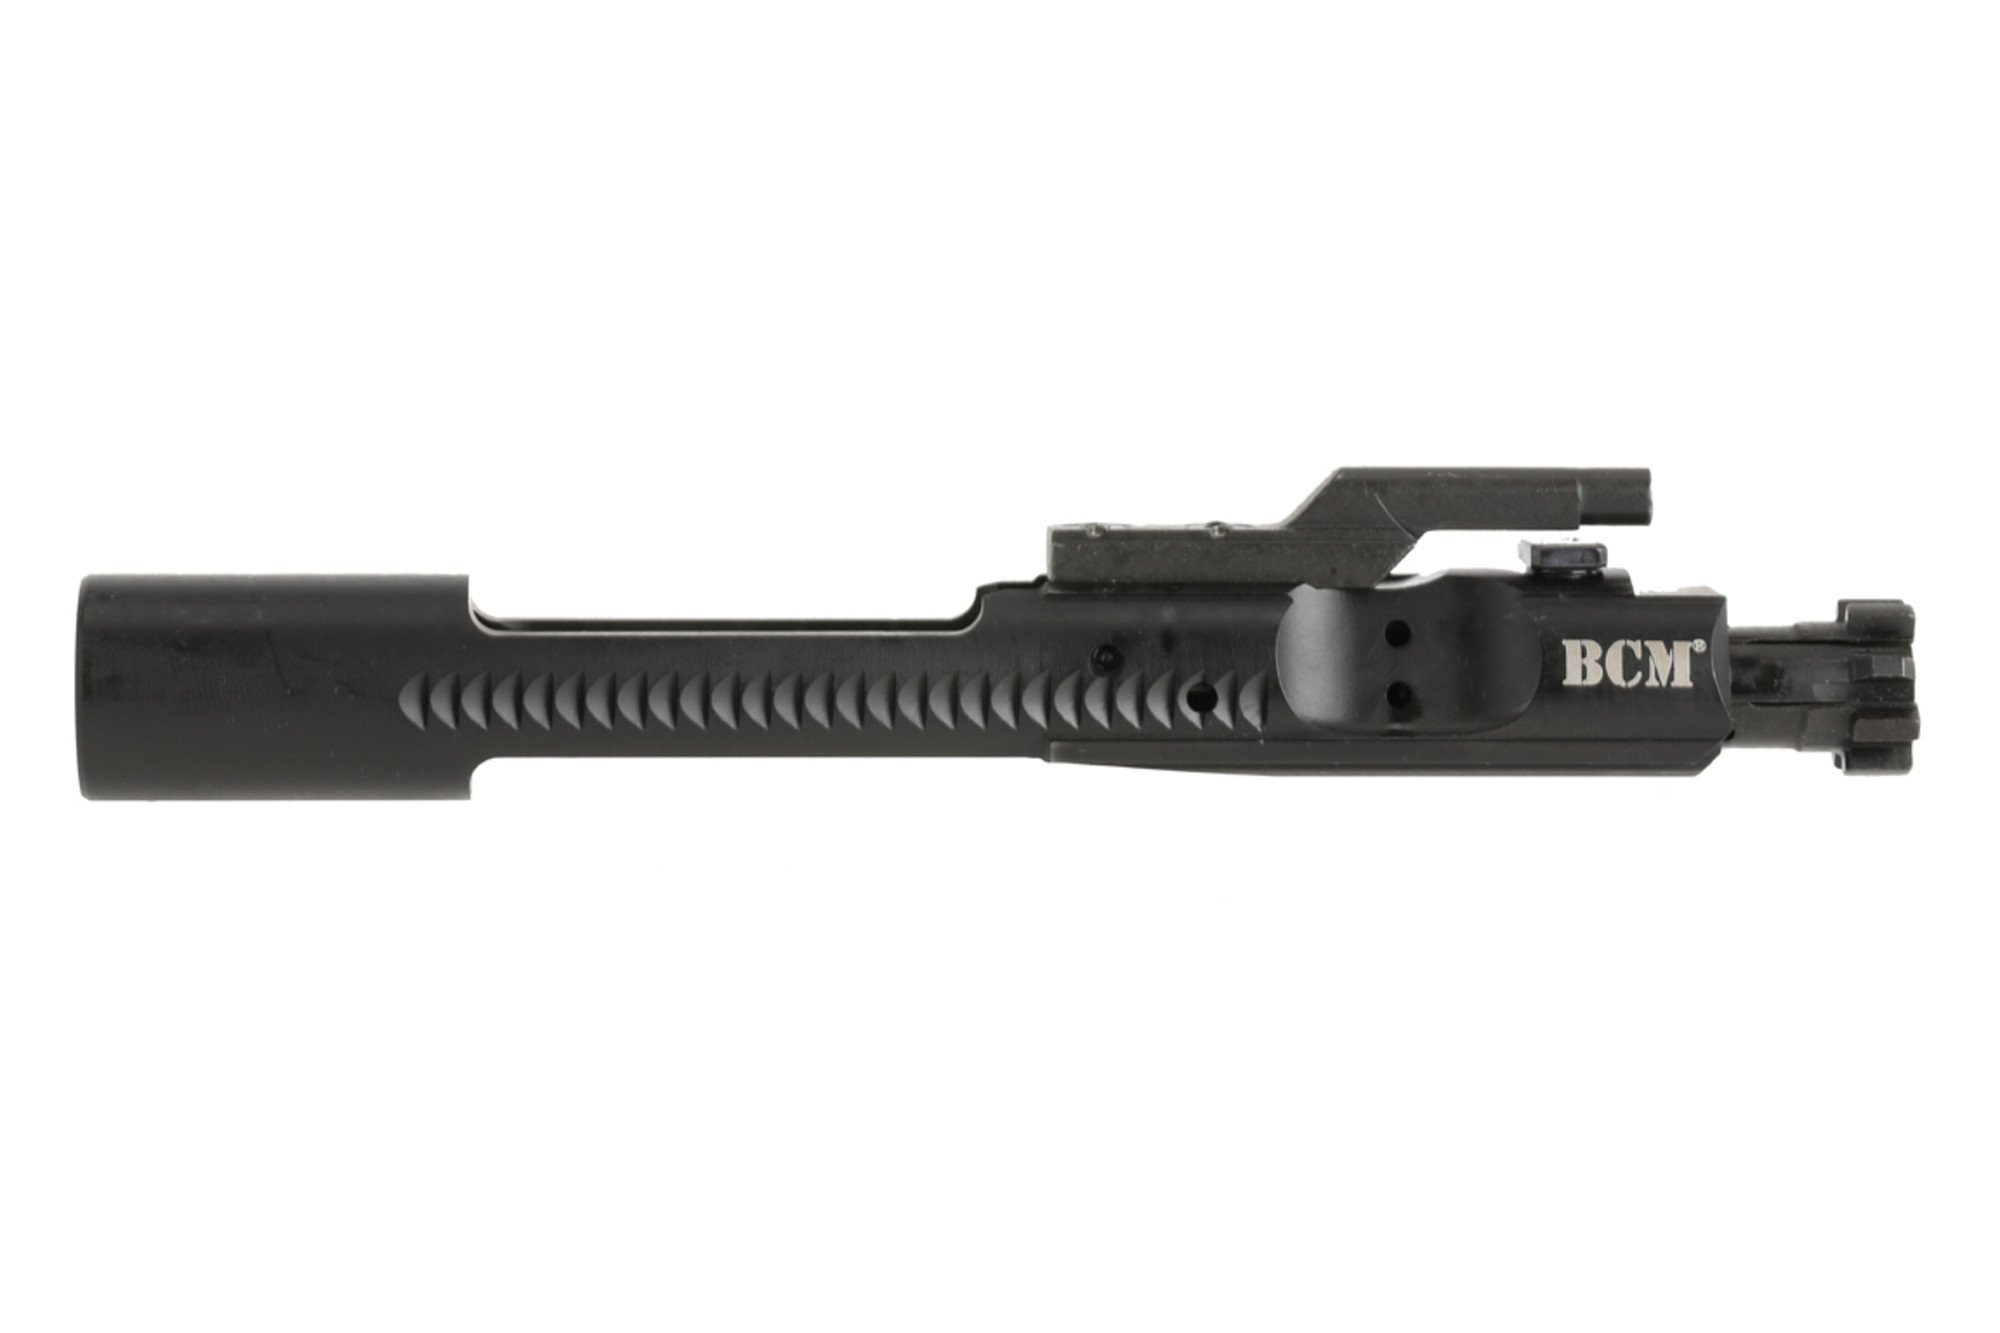 Bravo Company Manufacturing Bolt Carrier Group M16 - $174.95